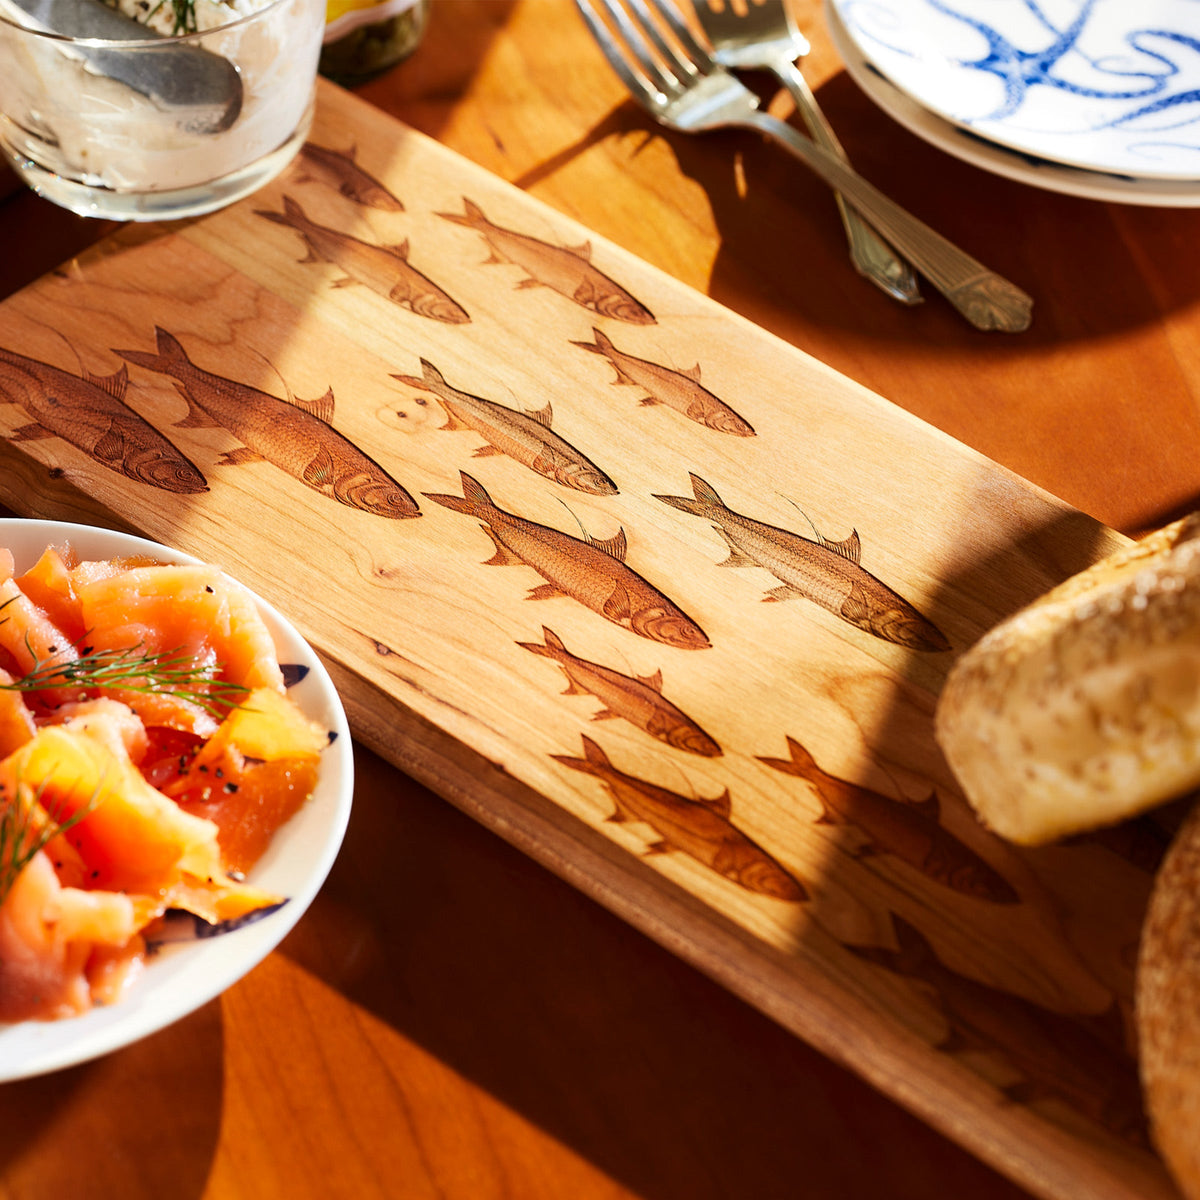 A Caskata School of Fish Serving Board with coastal charm, showcasing a delectable arrangement of salmon and bread.